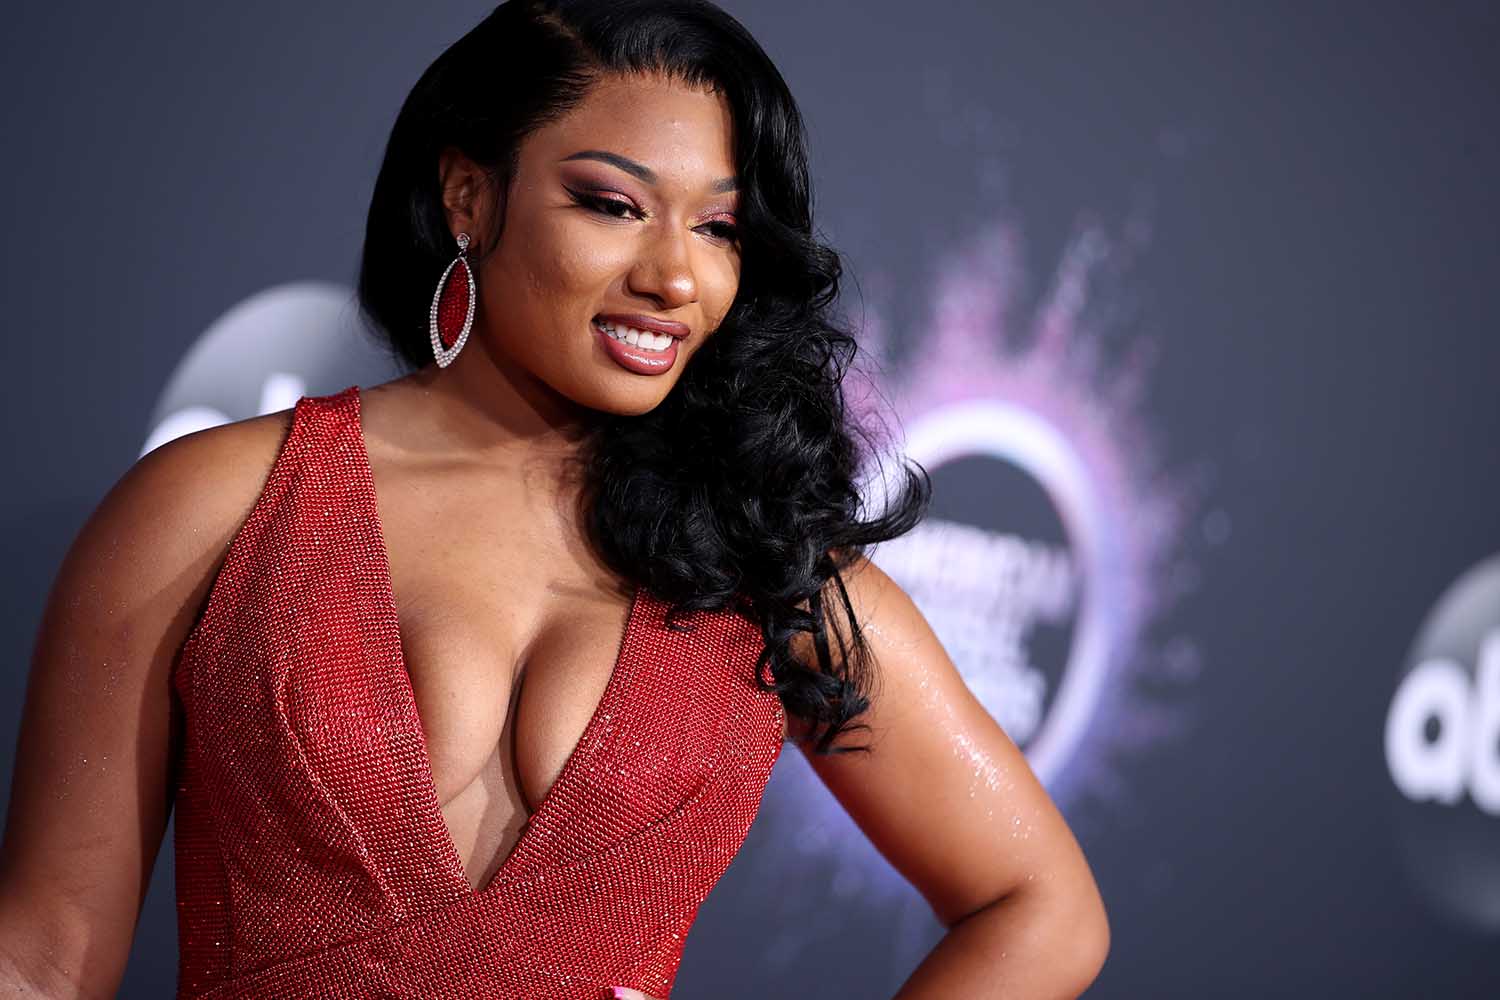 Megan Thee Stallion attends the 2019 American Music Awards at Microsoft Theater on November 24, 2019 in Los Angeles, California. 